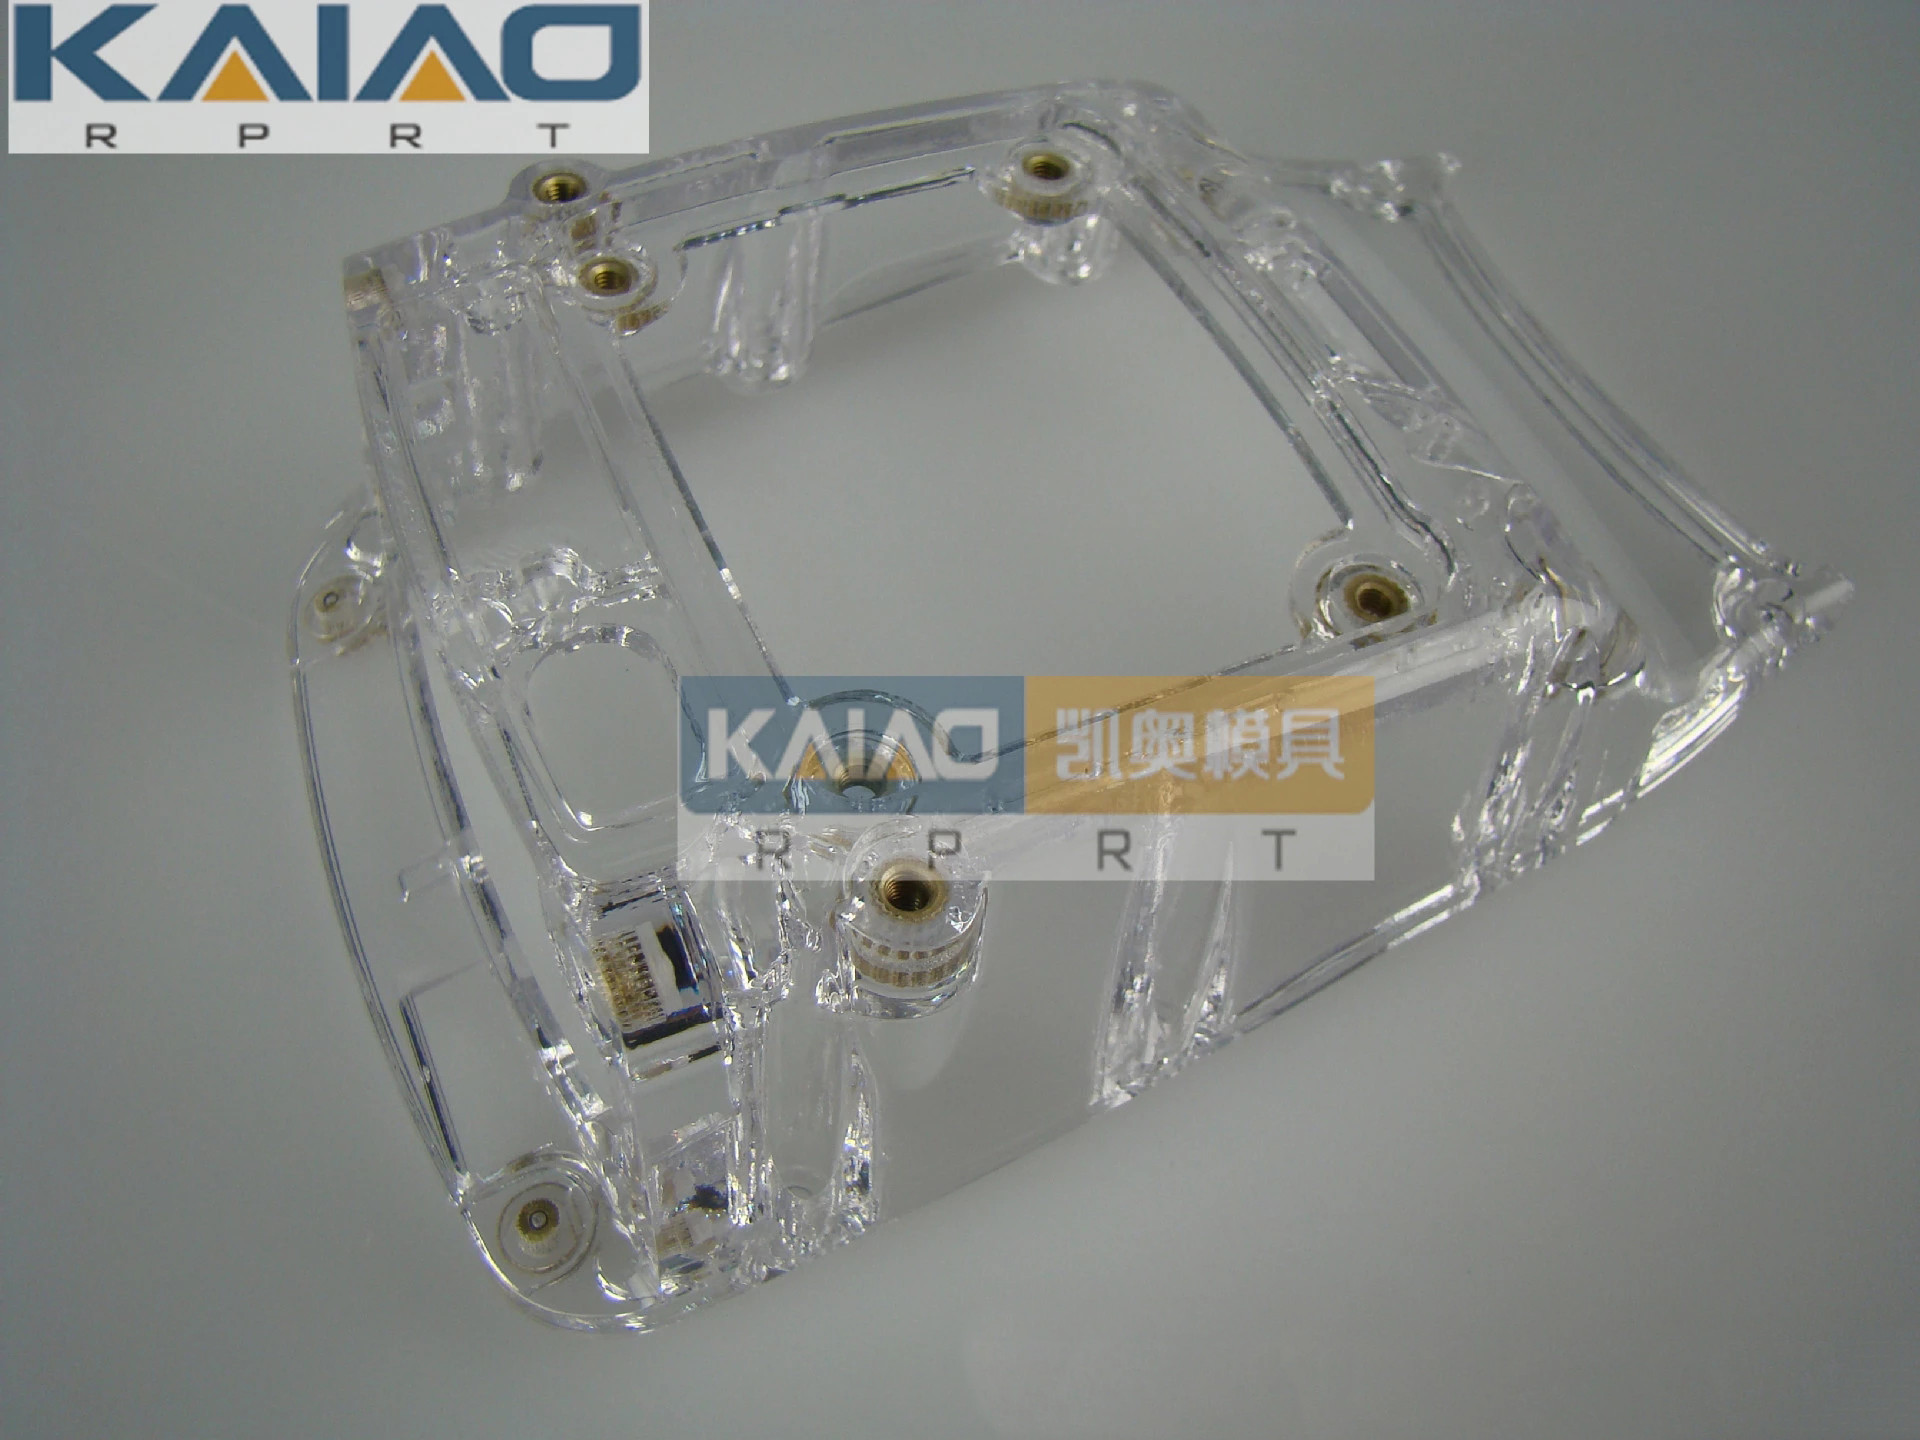  Clear Lighting CNC Machining Rapid Prototyping Automotive Reflectors Use Manufactures